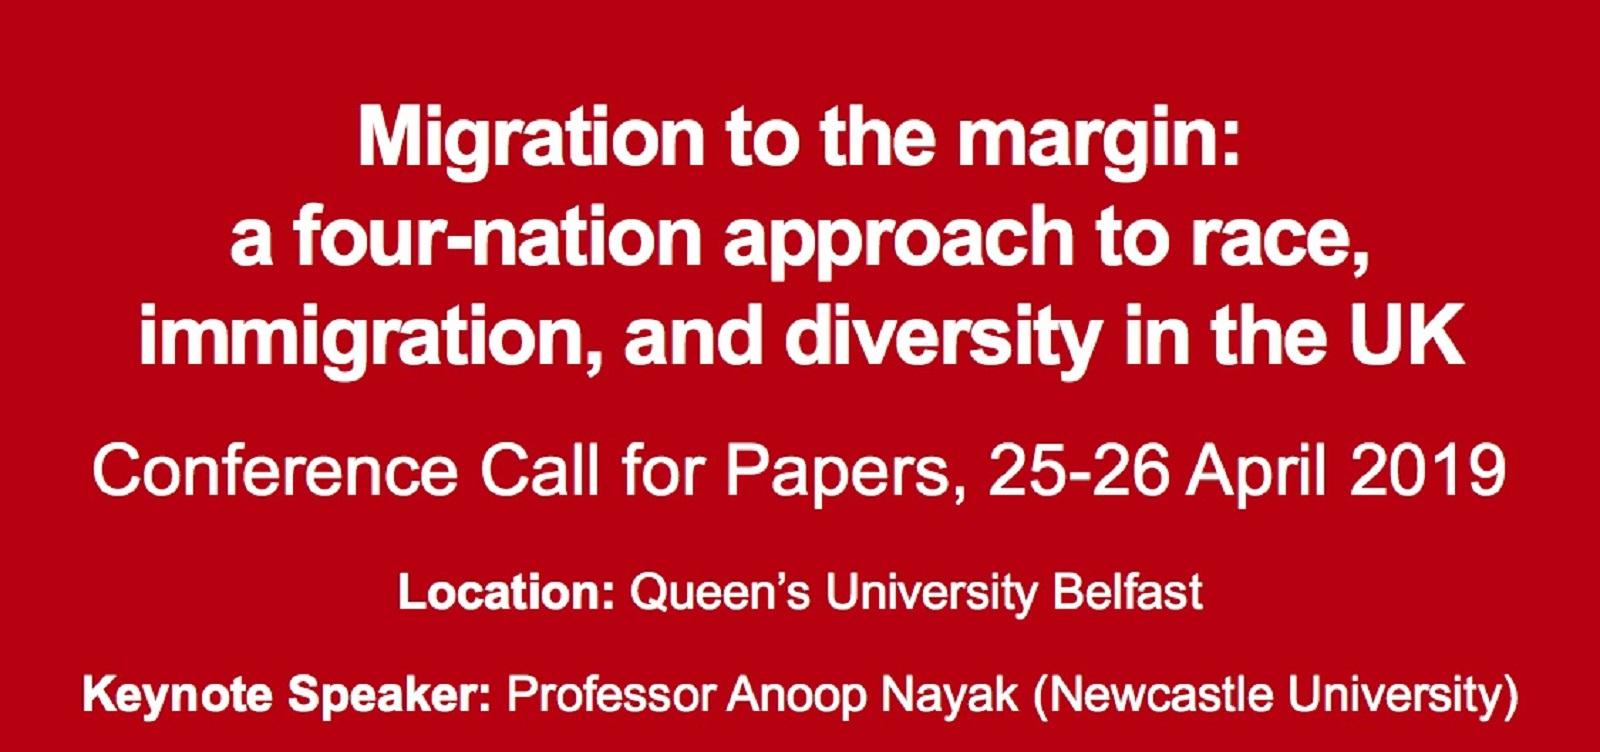 Migration to the margin - call for papers - 25 April 2019